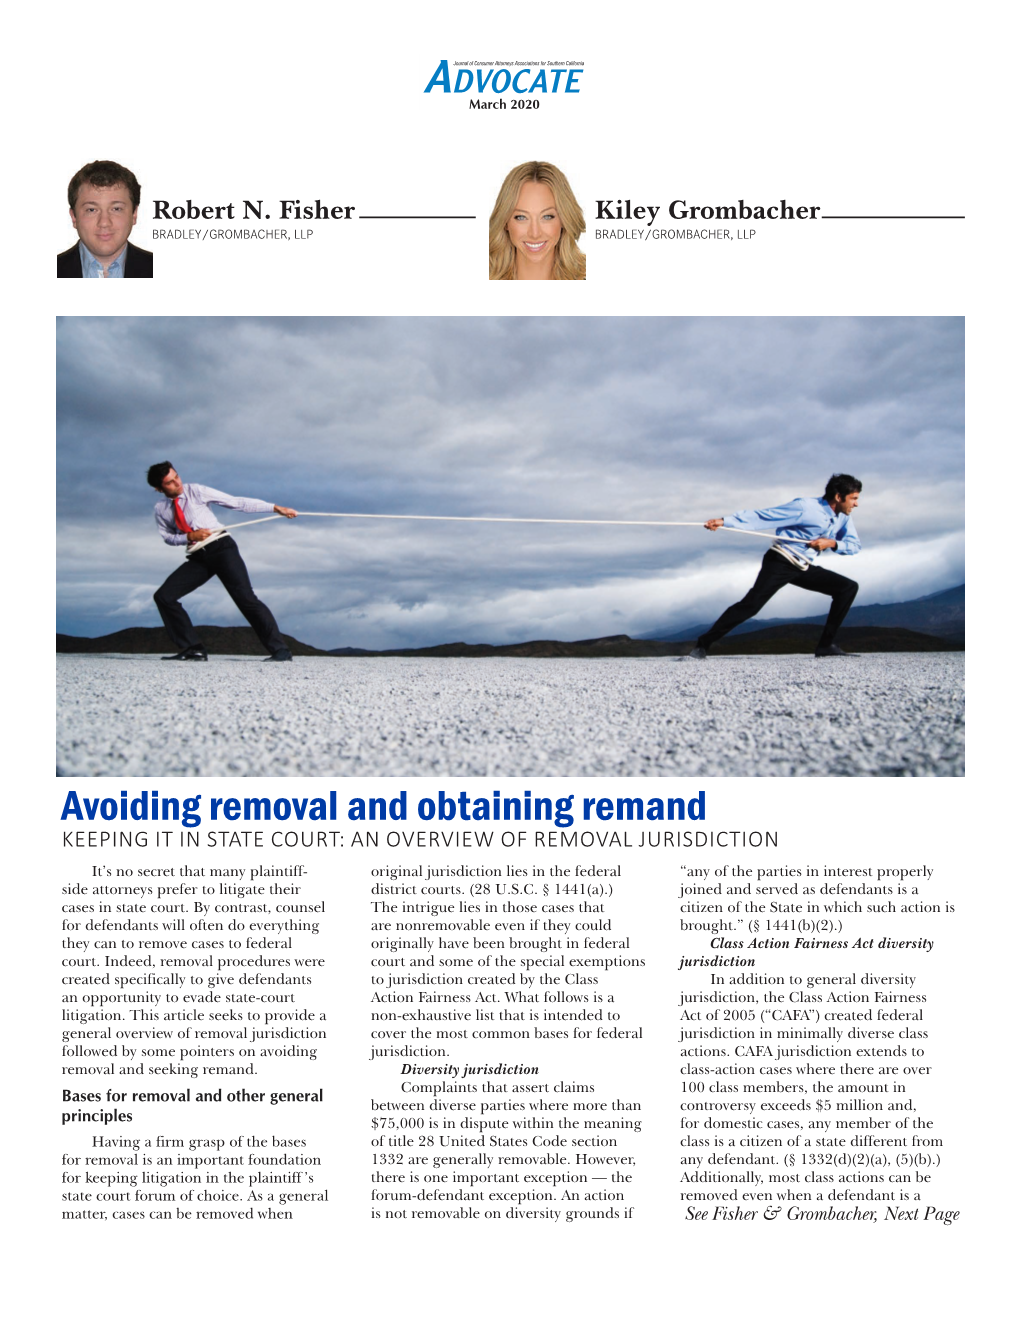 Avoiding Removal and Obtaining Remand